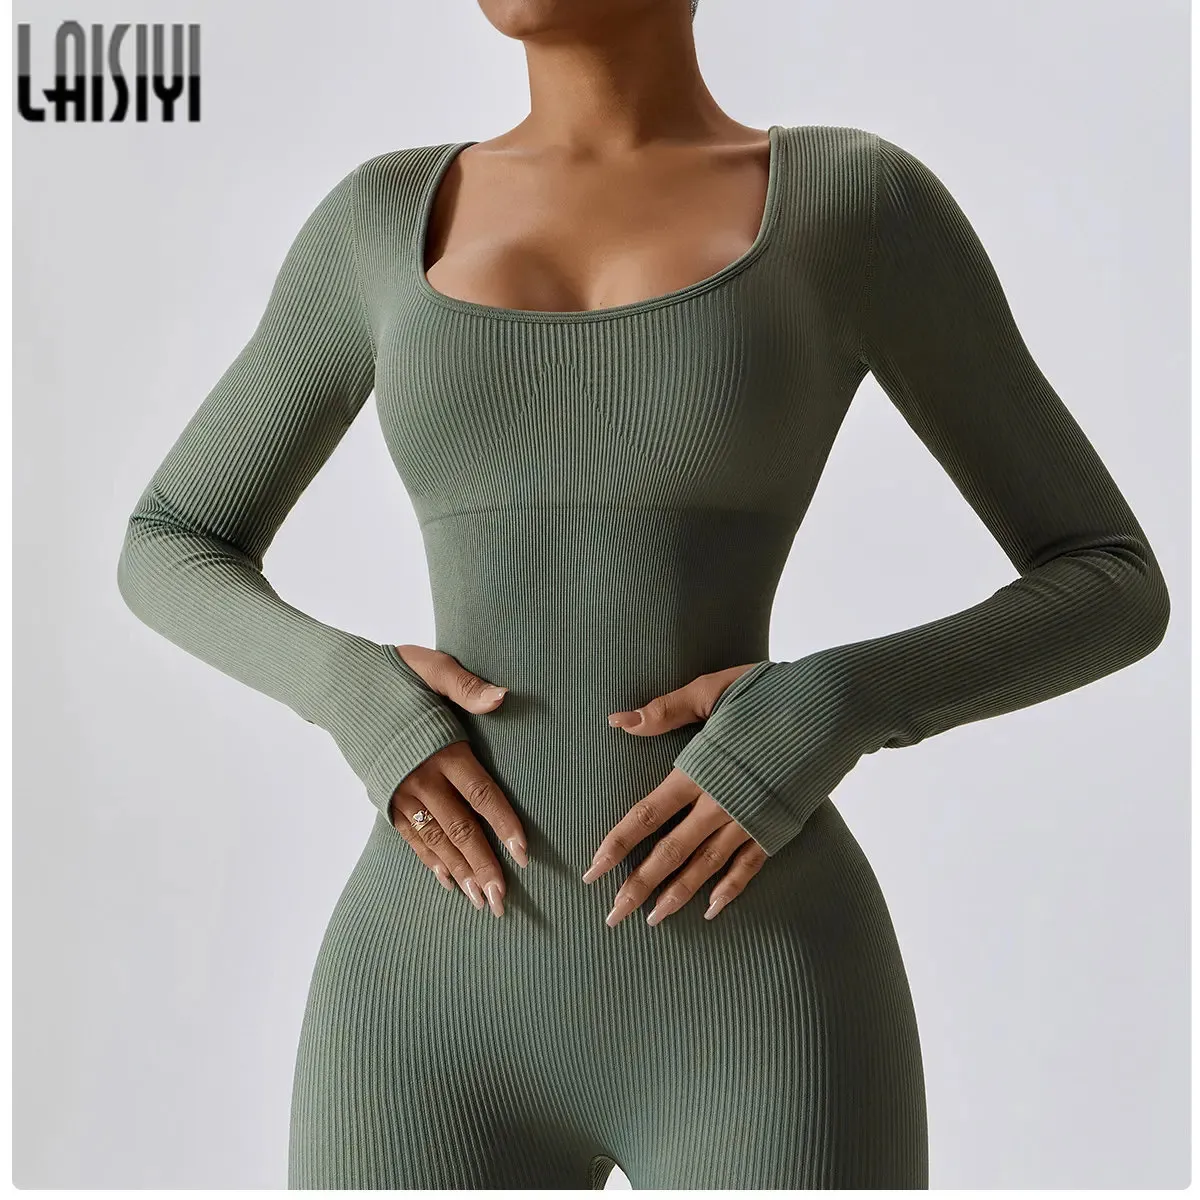 Laisiyi Fitness Jumpsuits autumn for Women sexy Bodycon Playsuit Square Neck Long Sleeve Rompers女性スリムスポーツウェア231225